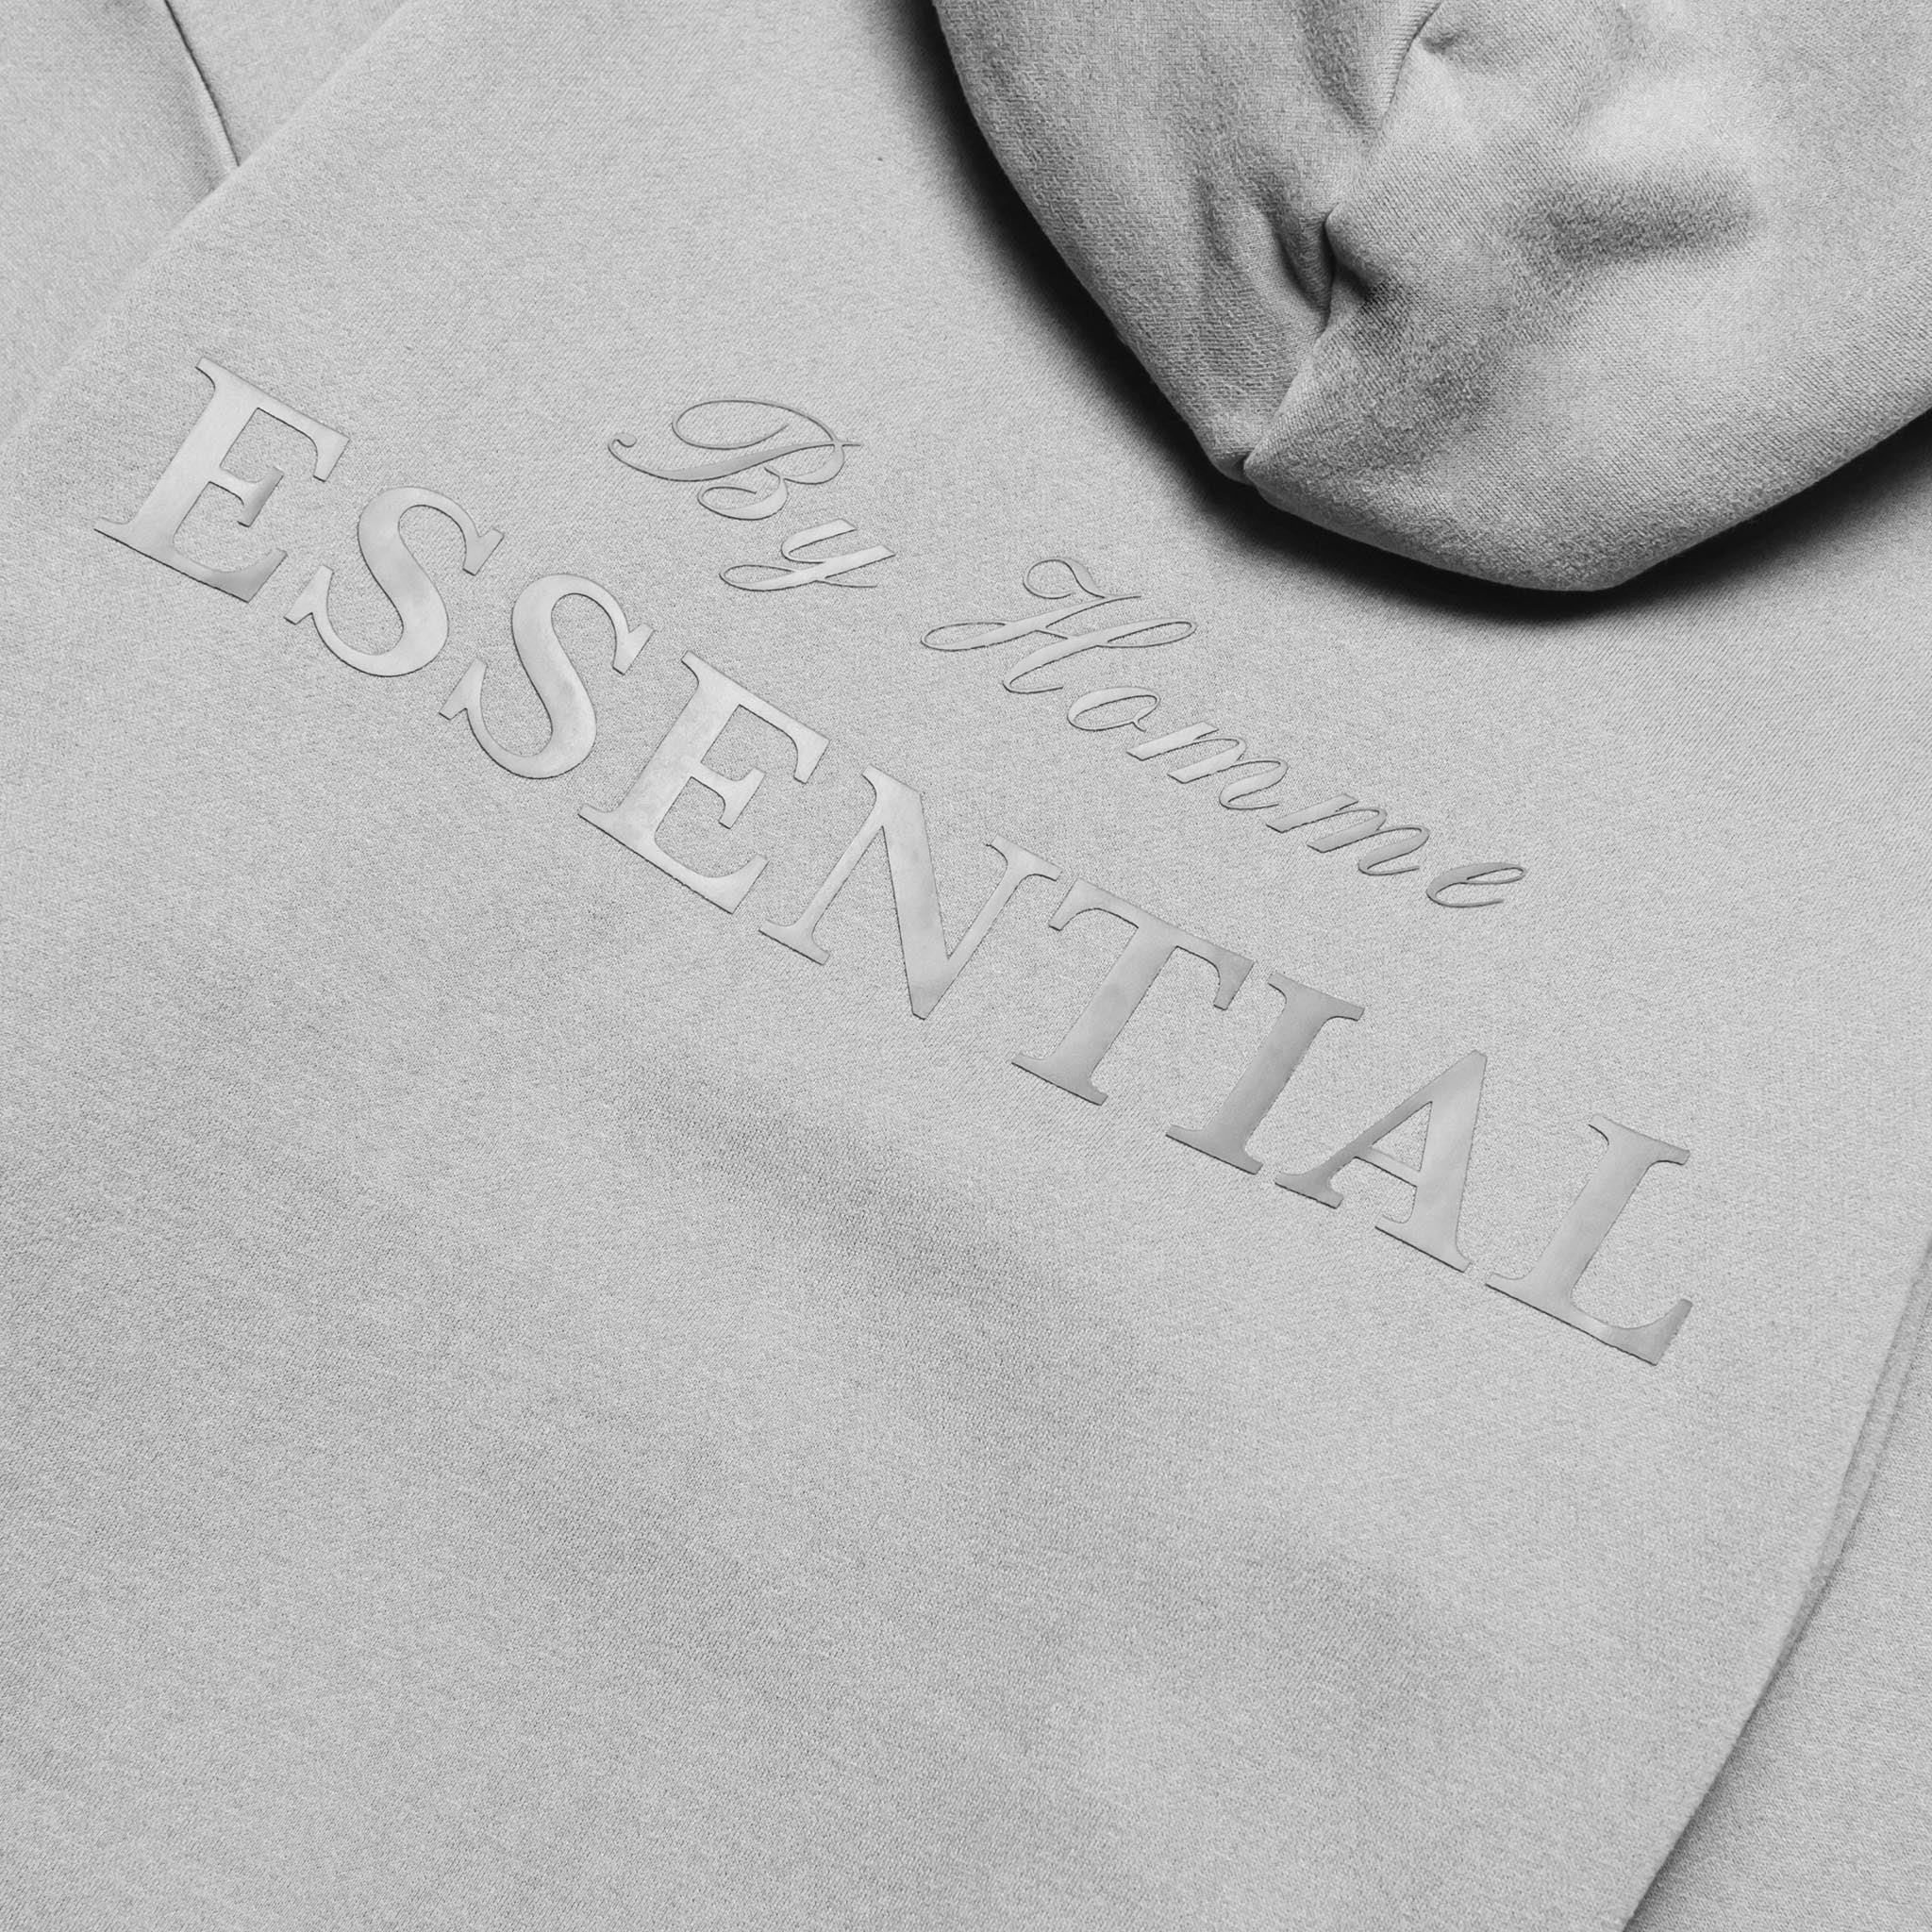 HOMME+ ESSENTIAL By Homme Hoodie Cement